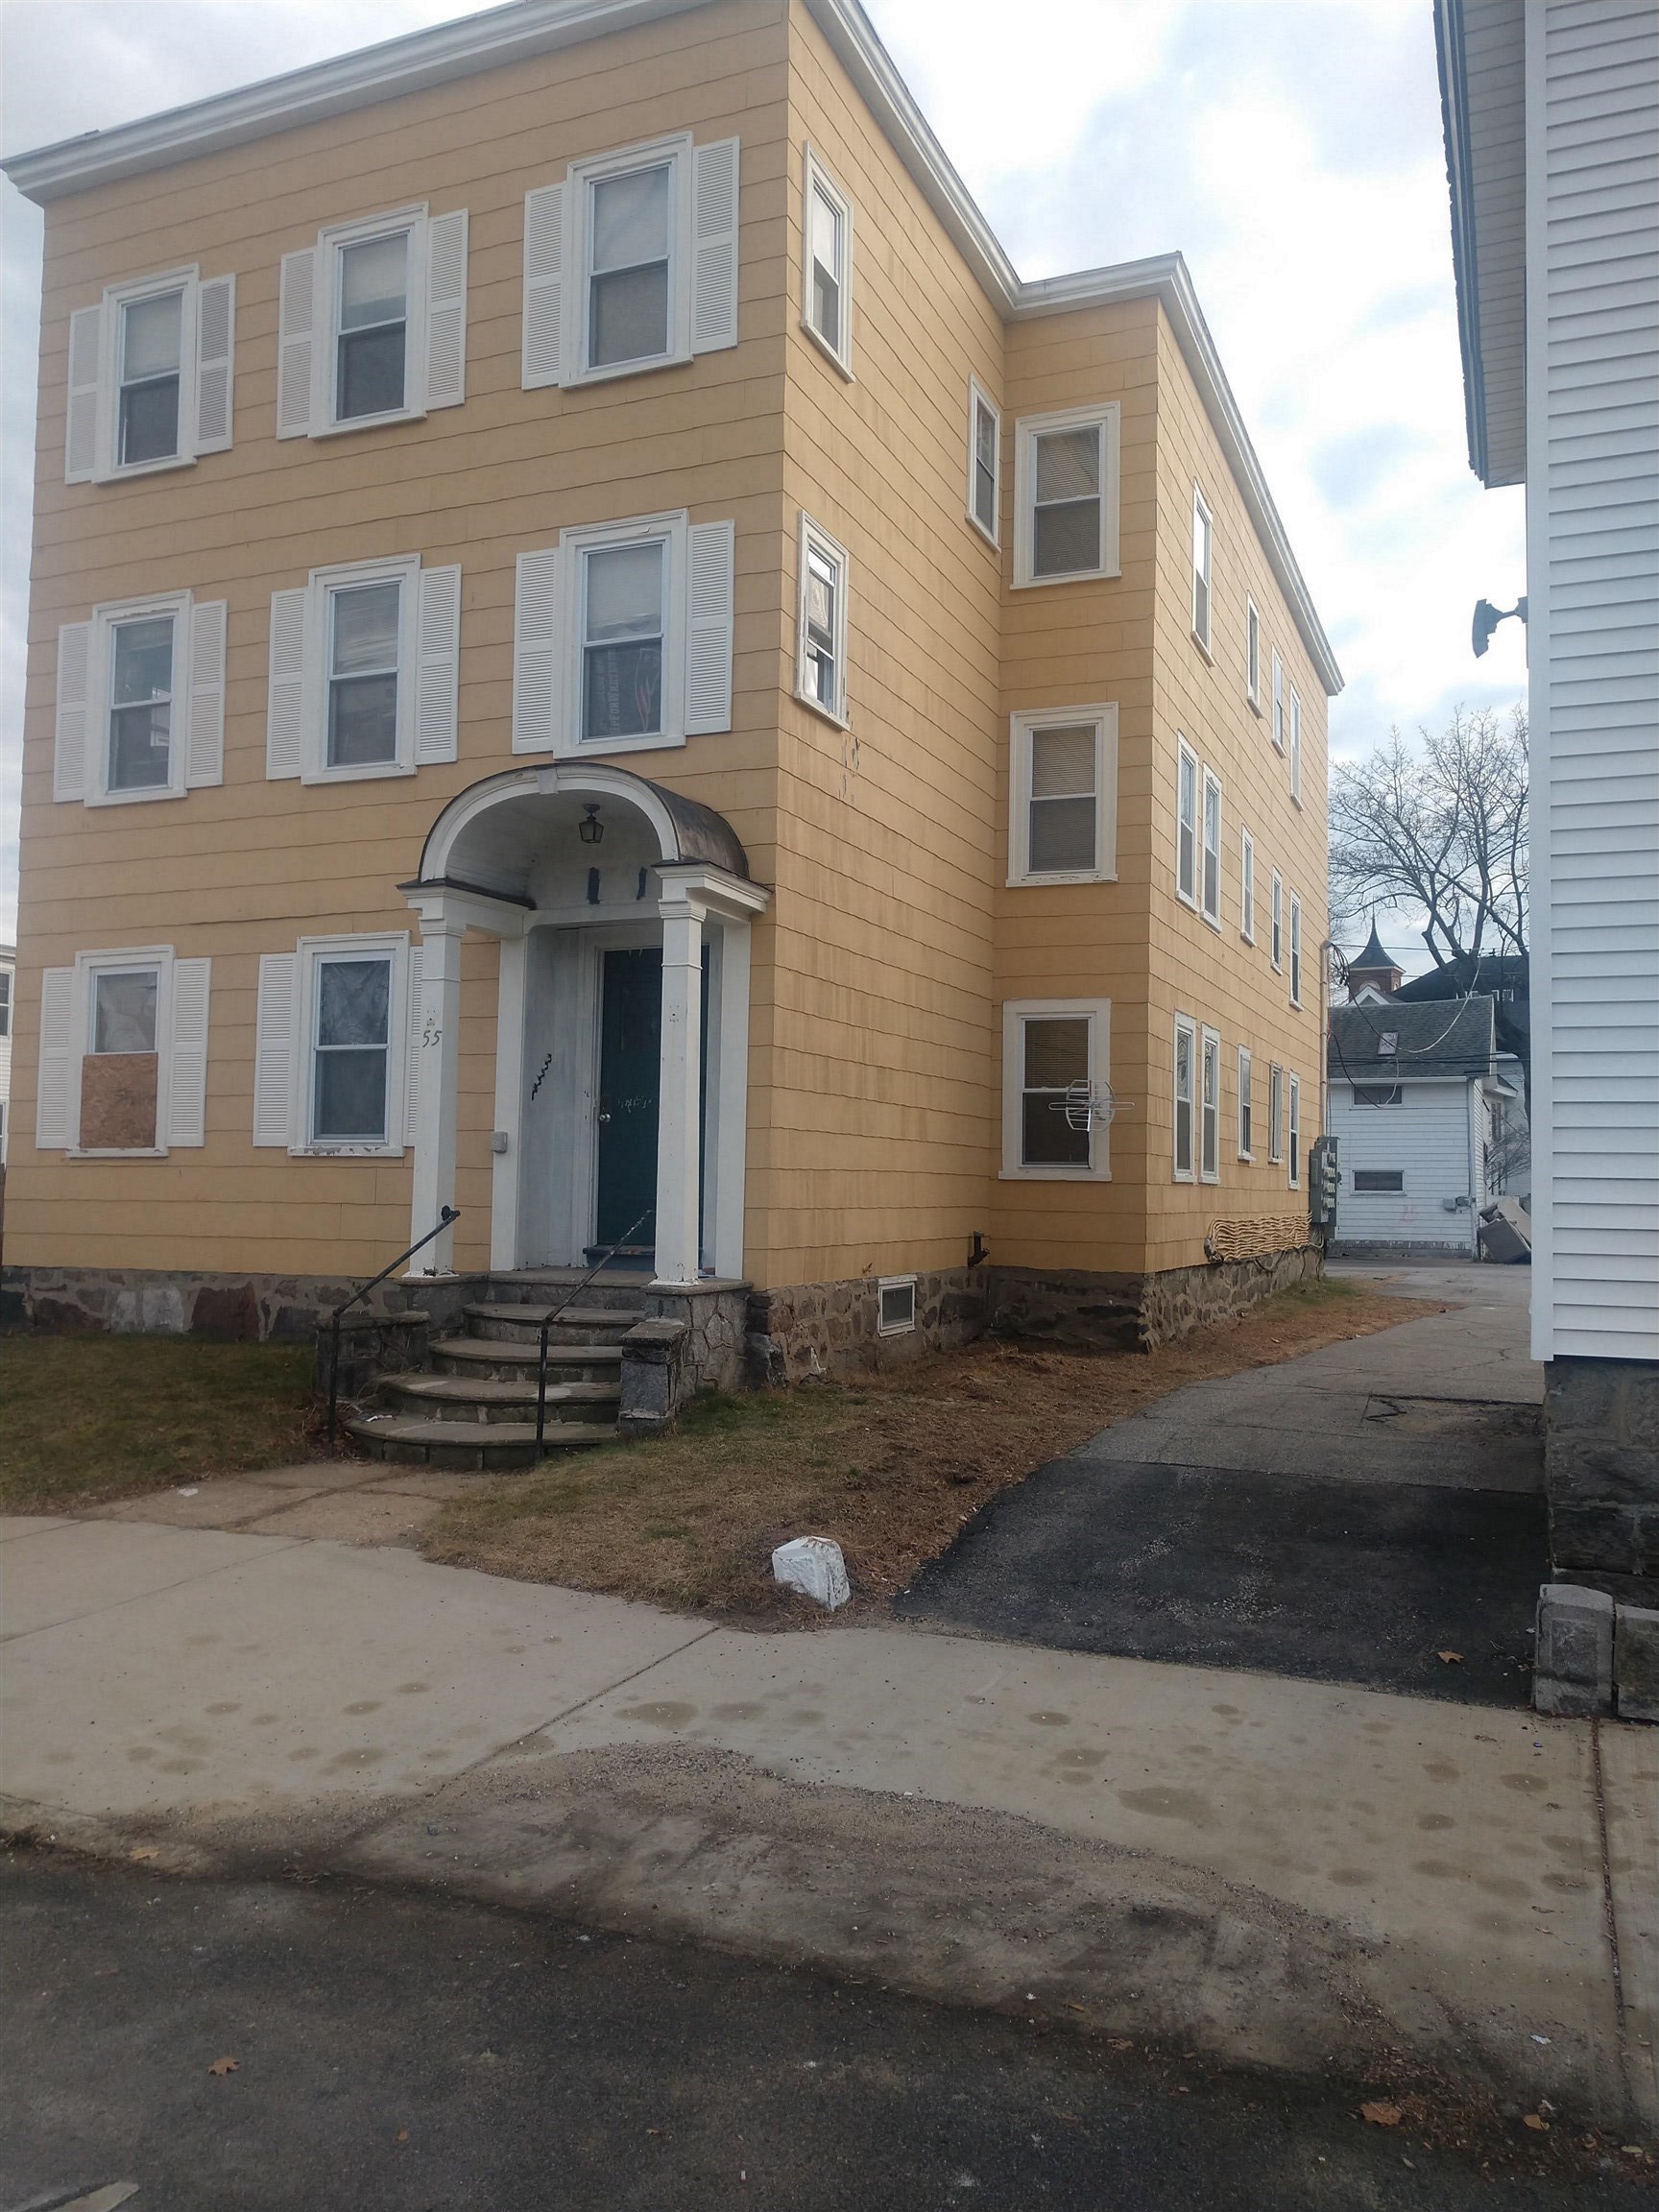 MANCHESTER NH Multi Family Homes for sale